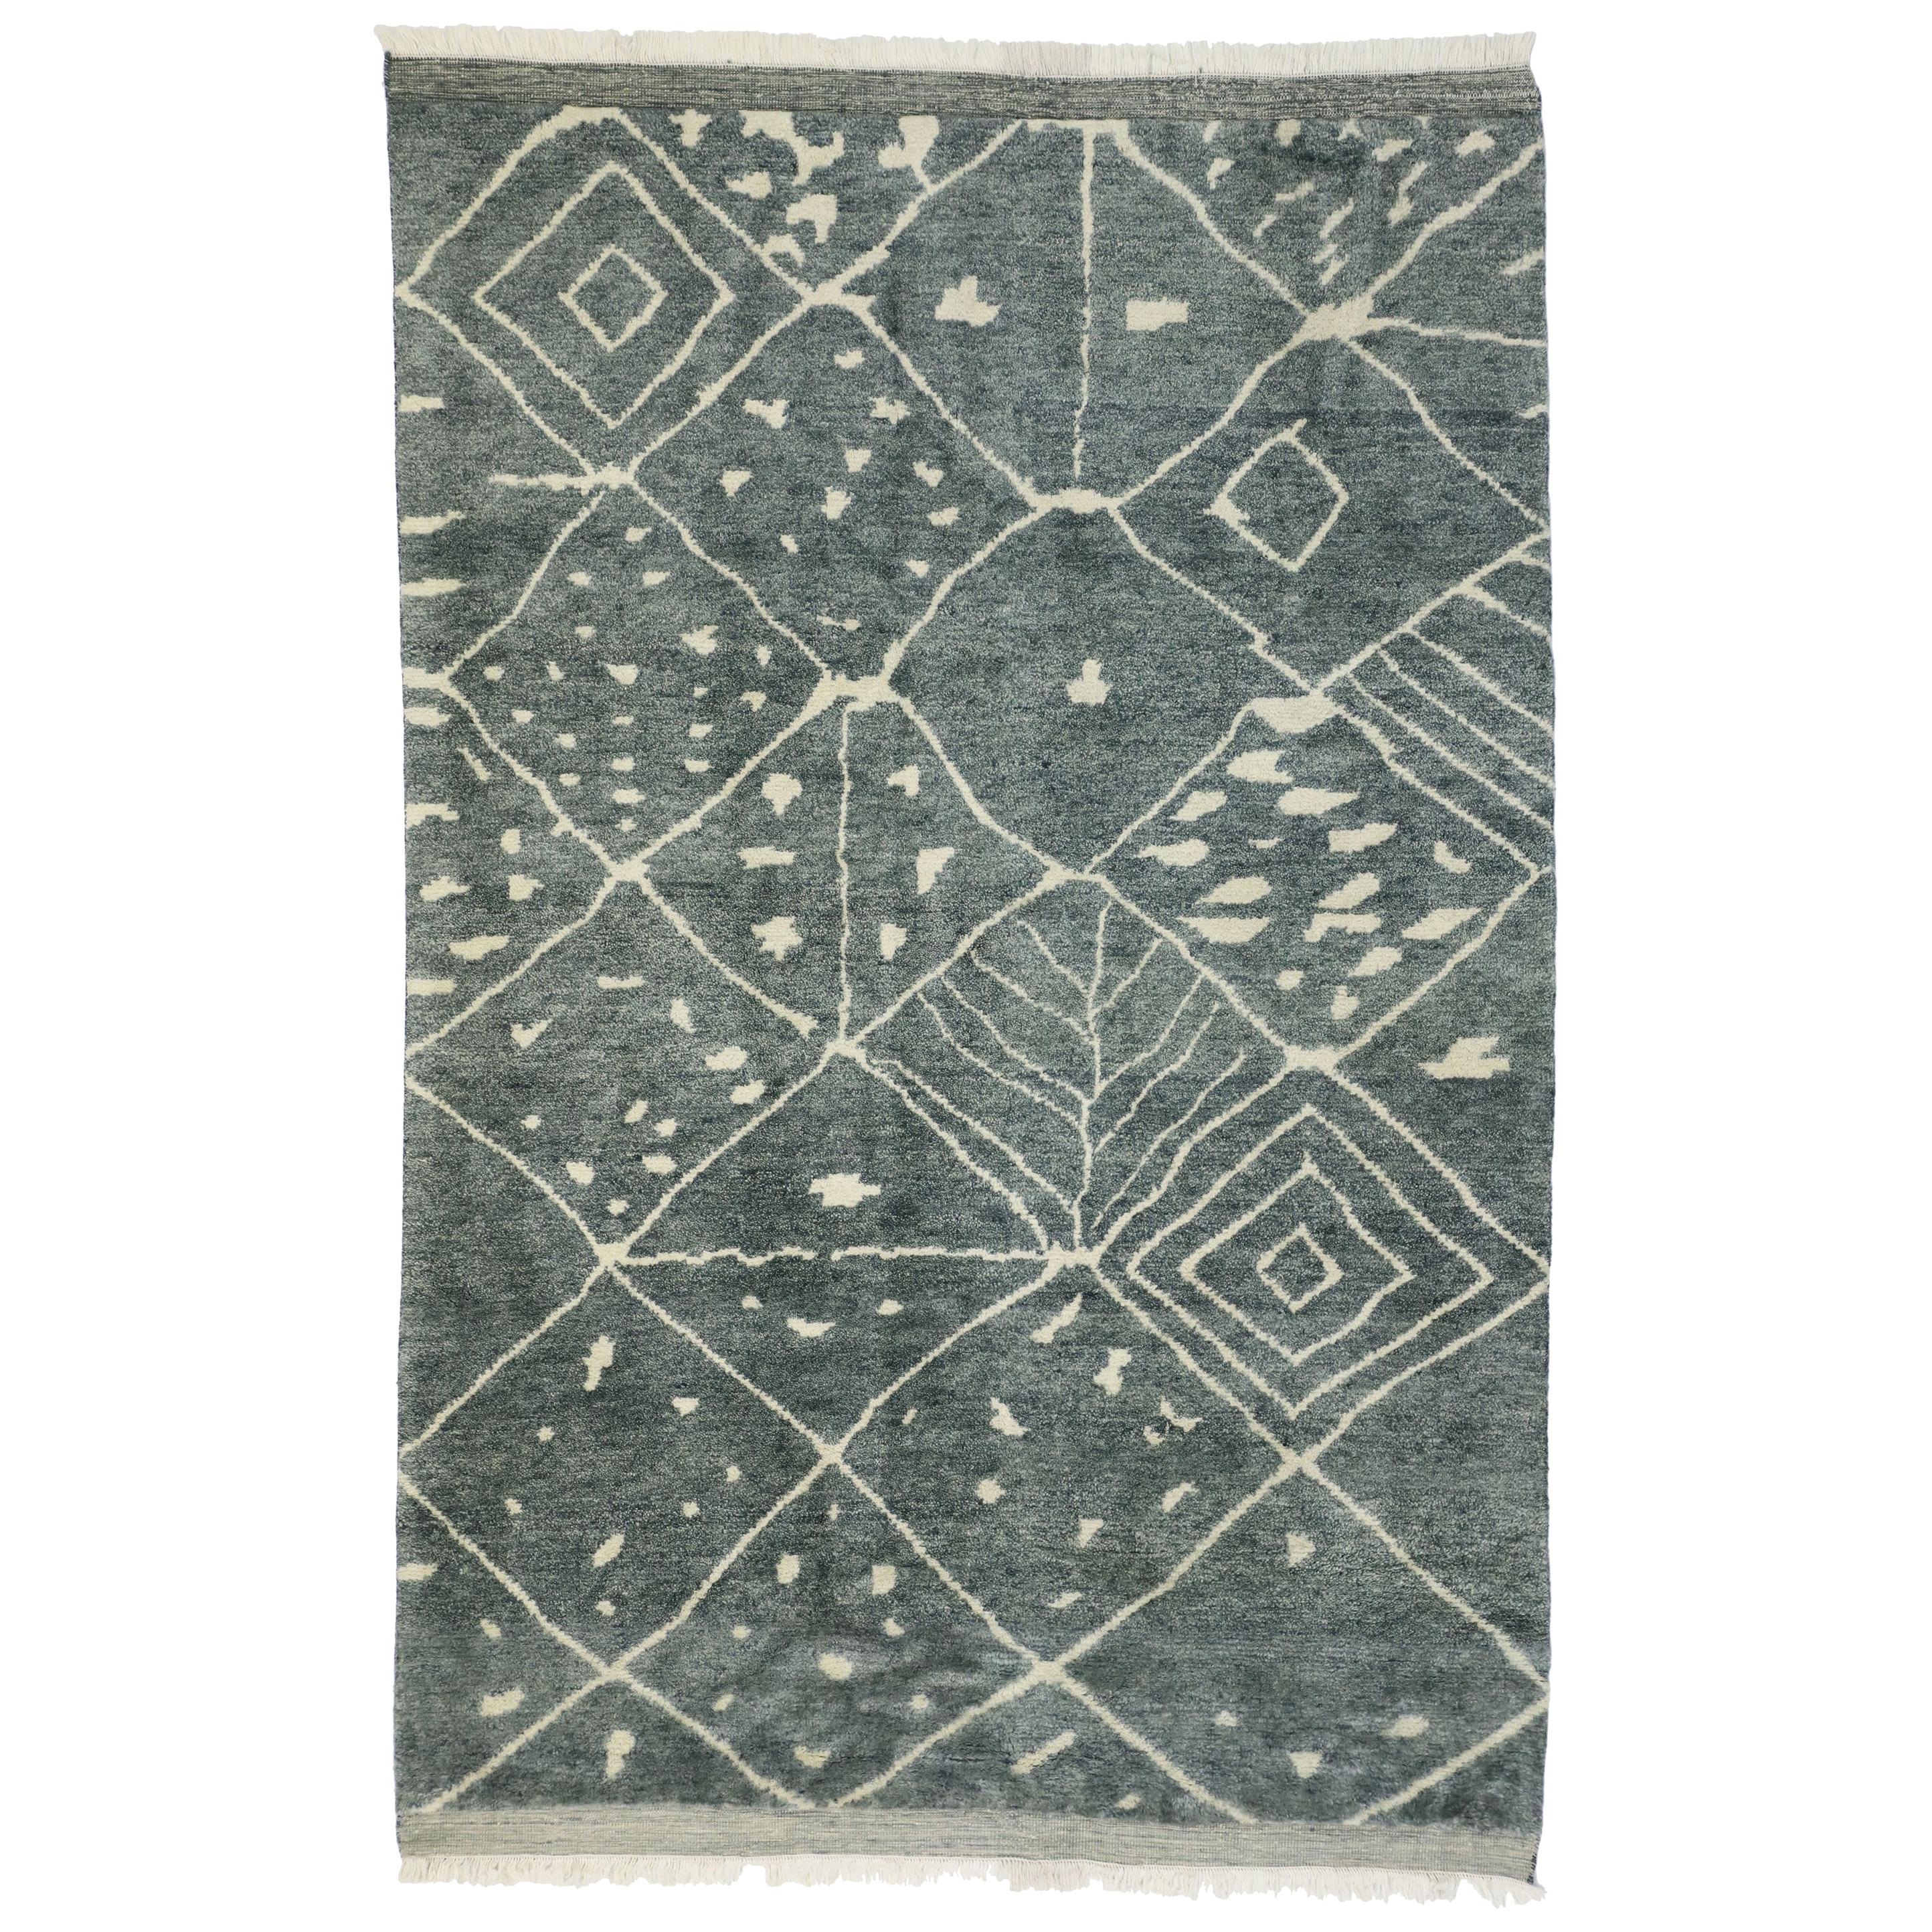 New Contemporary Moroccan Area Rug with Organic Modern and Hygge Style For Sale